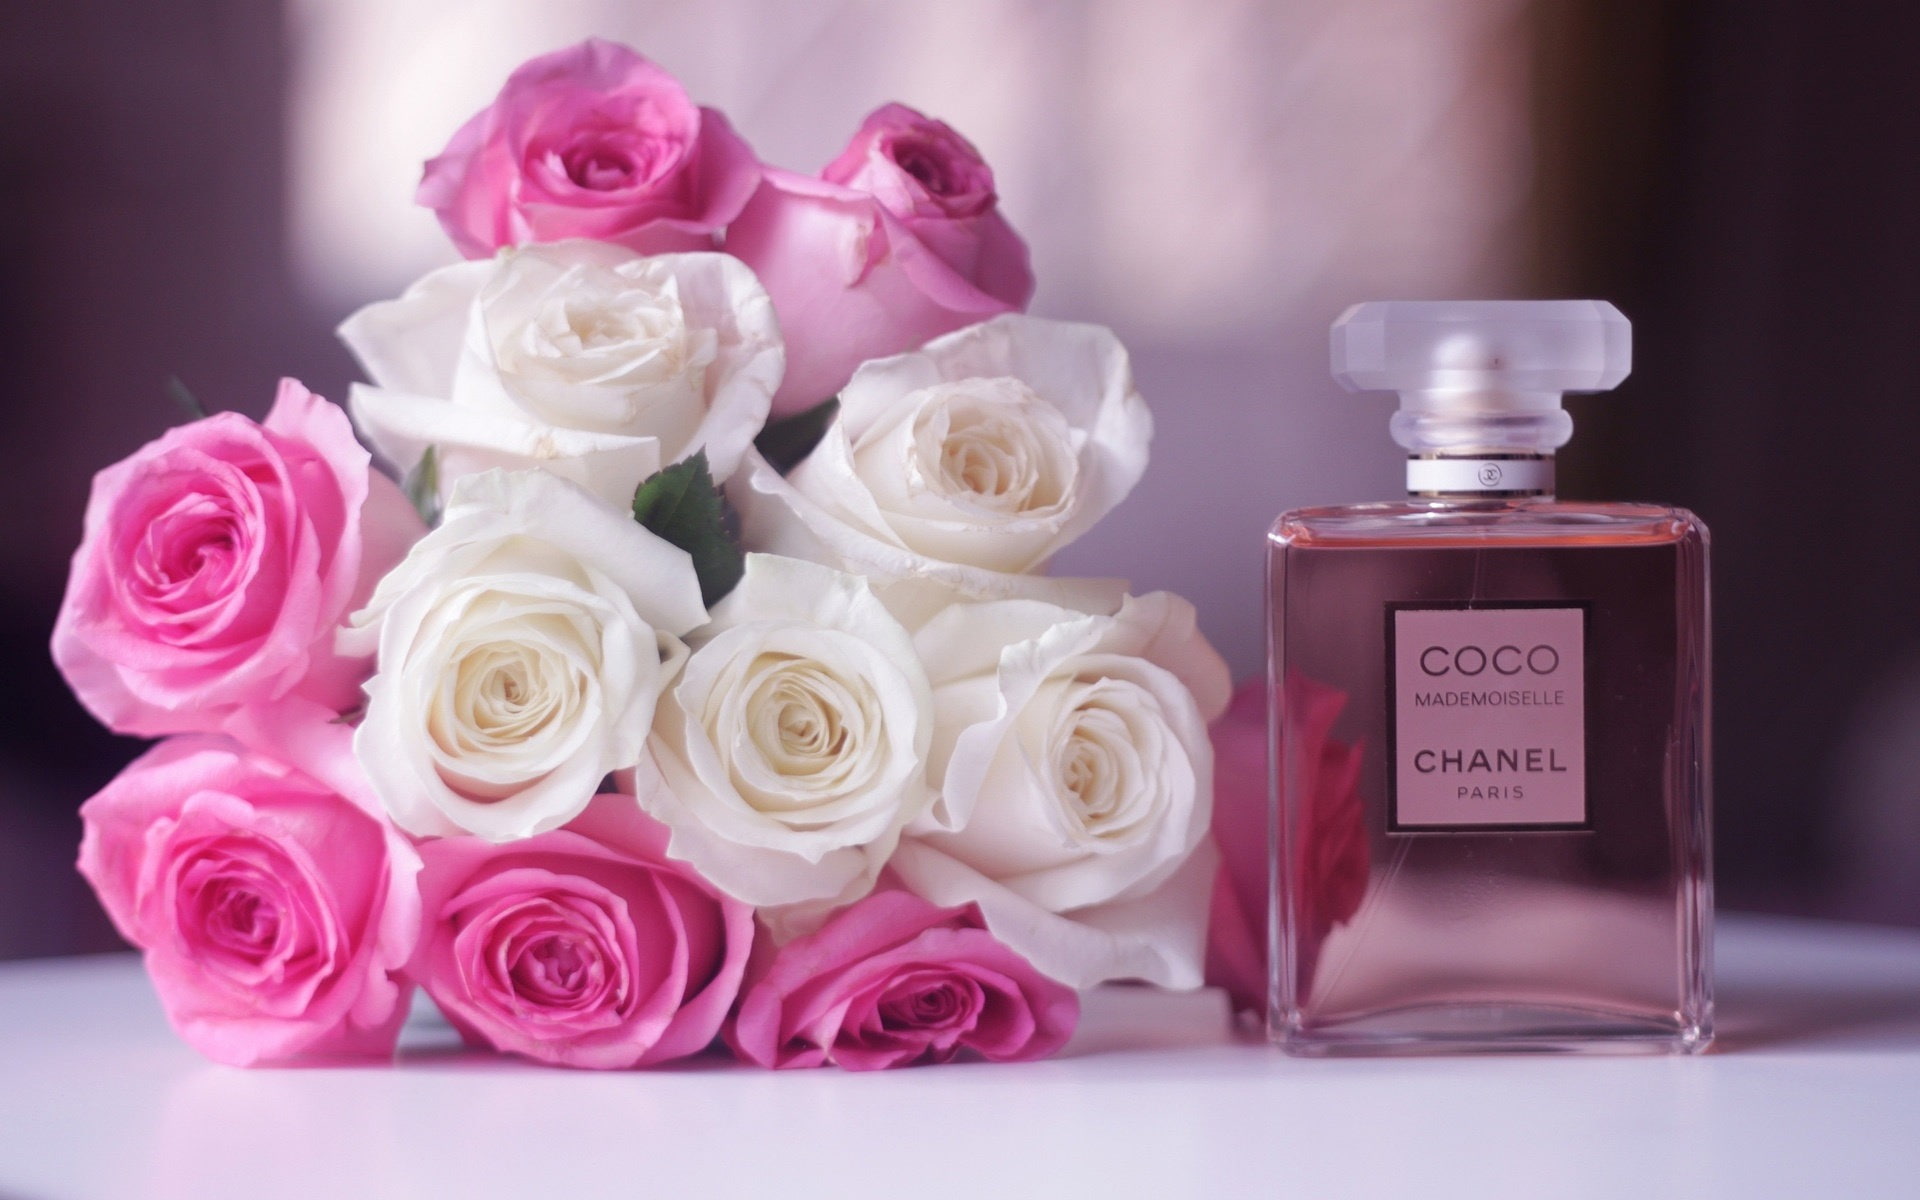 CHANEL COCO-Brand perfume wallpapers, Coco Chanel fragrance bottle